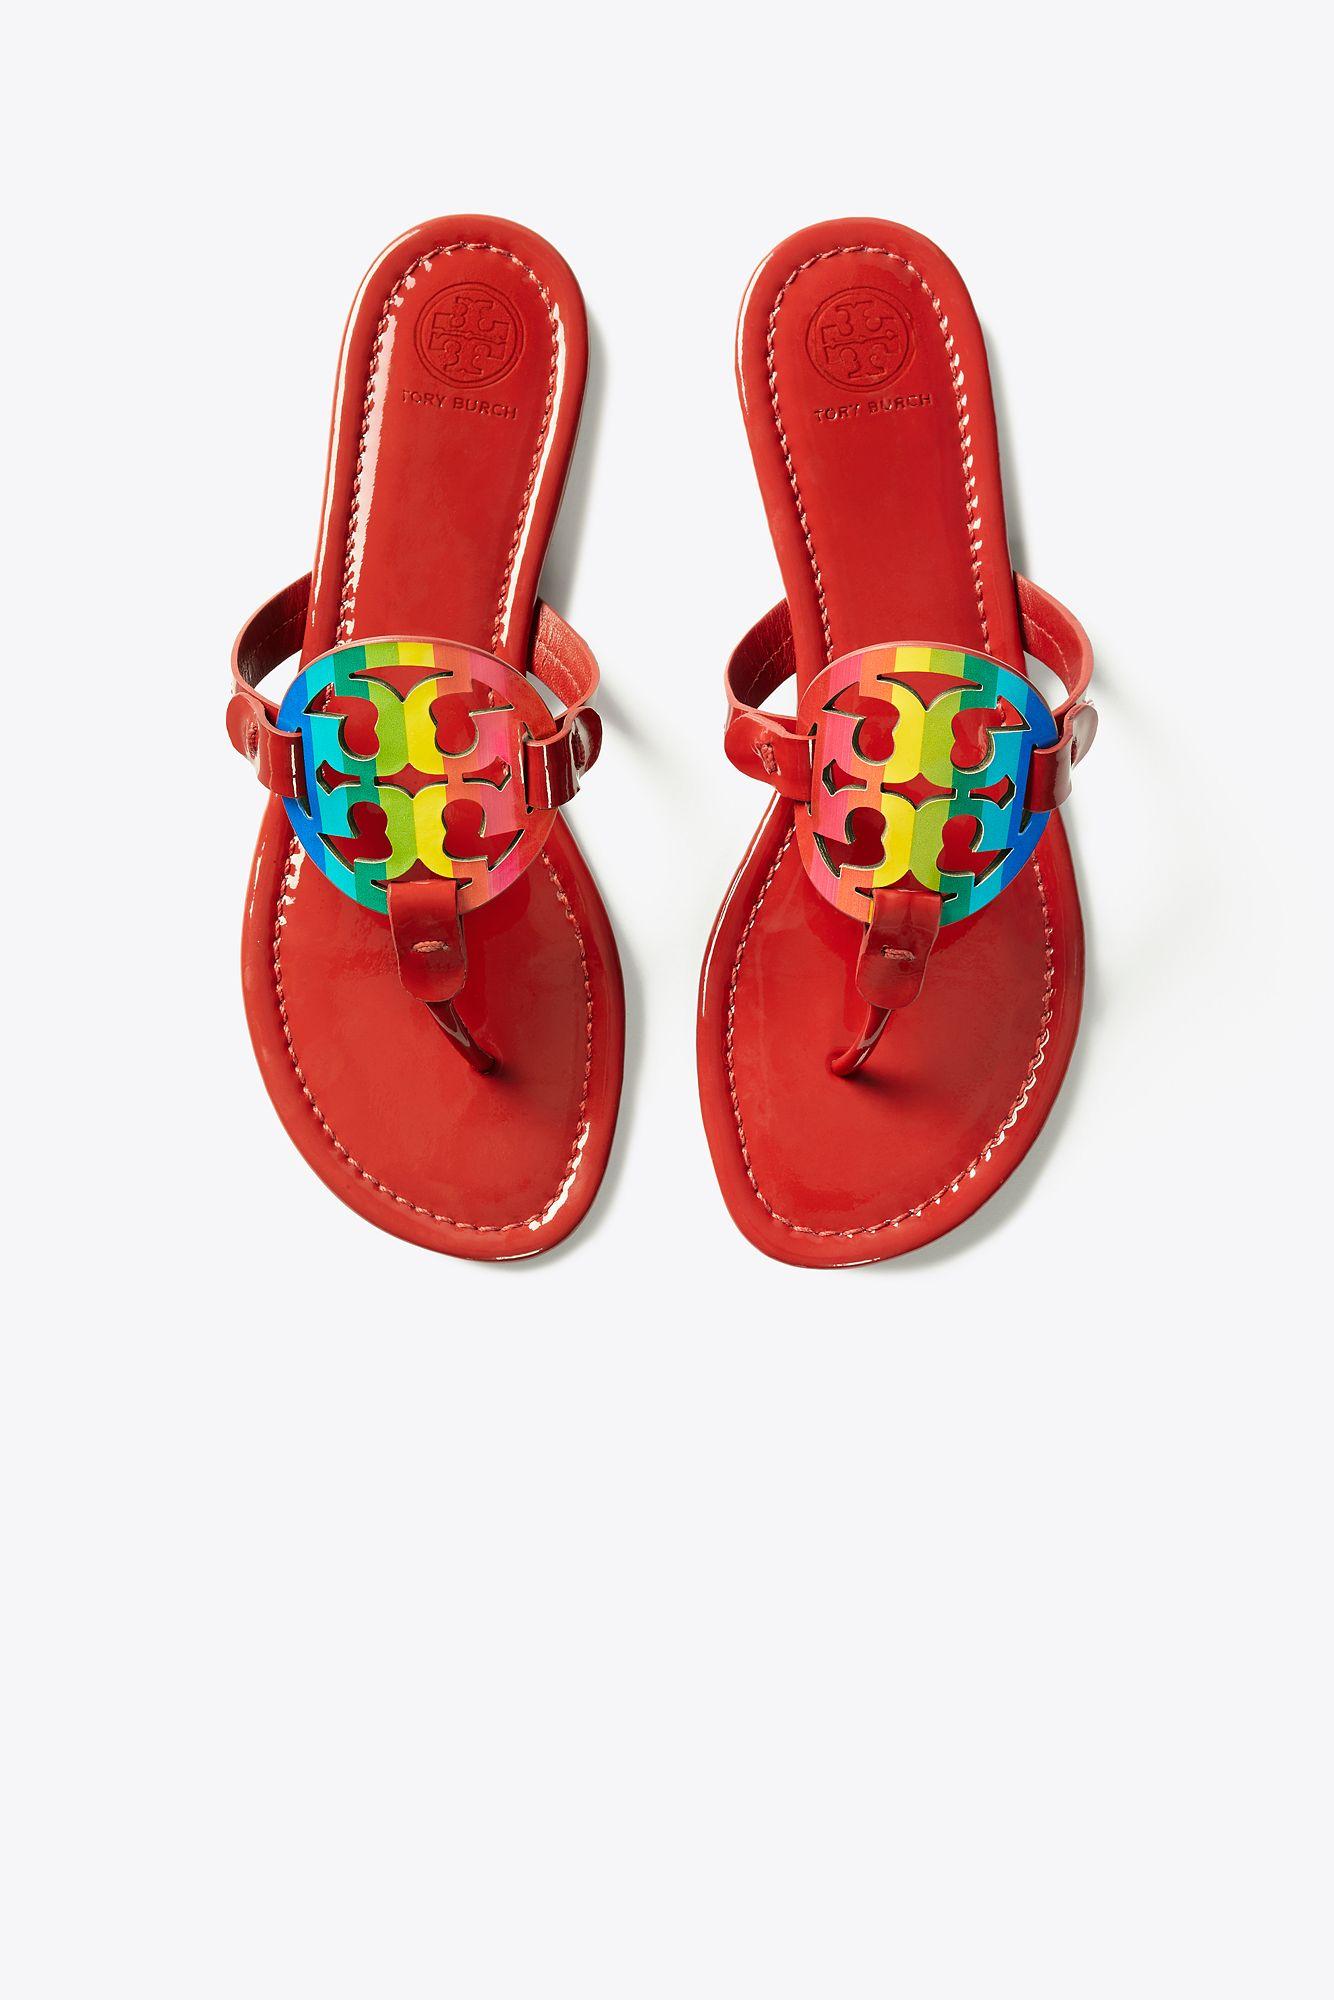 Tory Burch Miller Sandals, Printed Patent Leather in Bright Rainbow ...